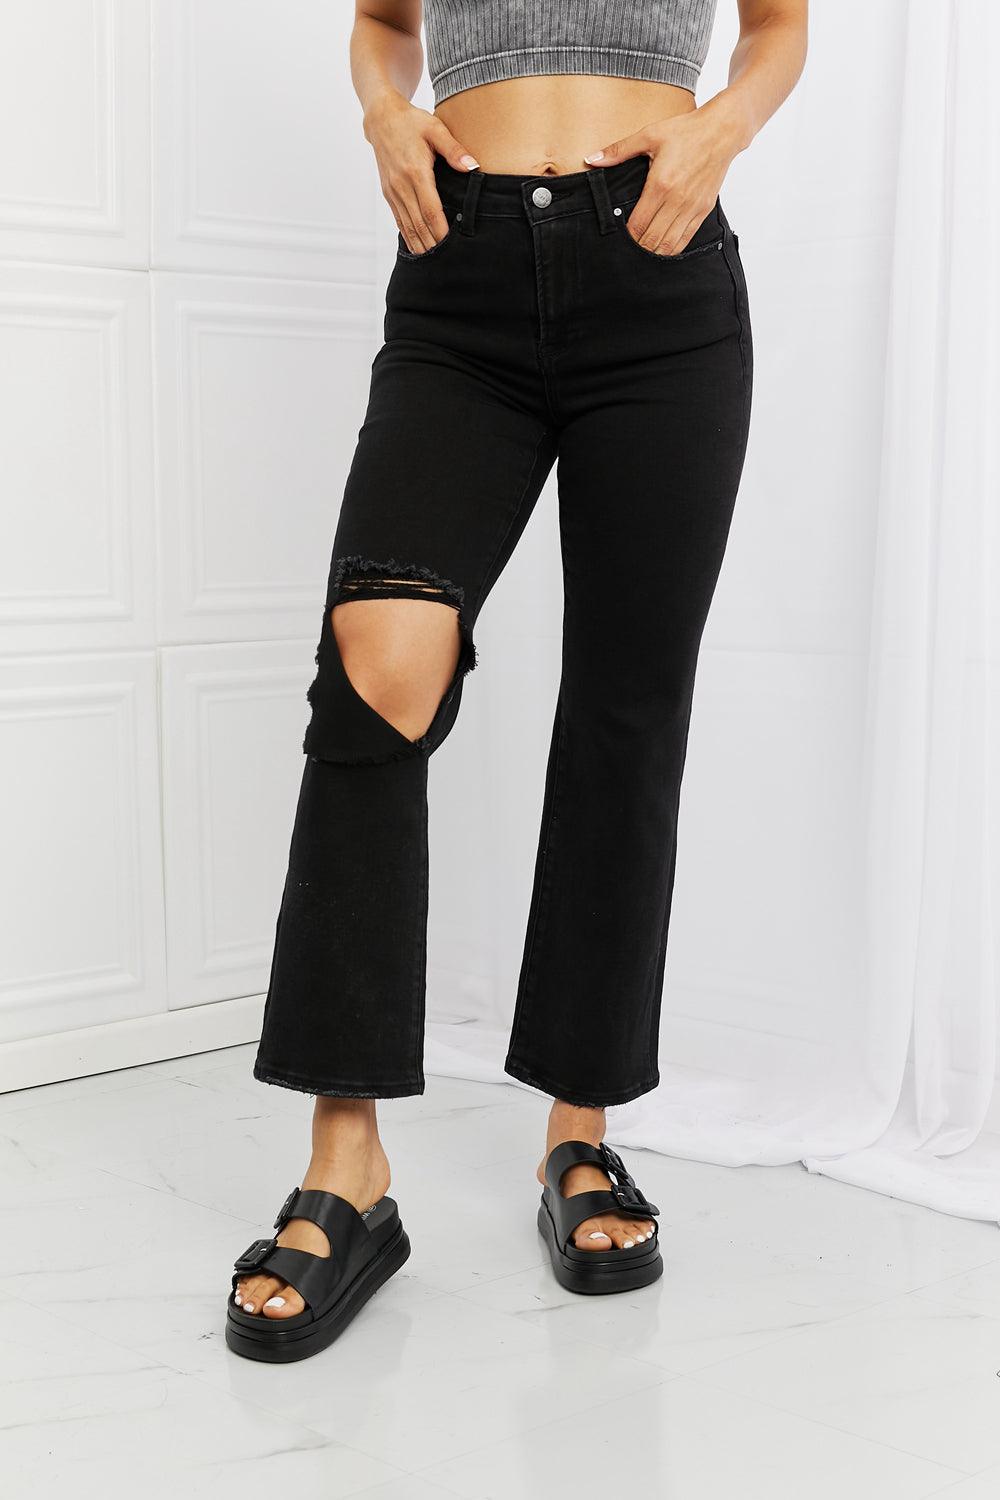 RISEN Full Size Yasmin Relaxed Distressed Jeans - The Fiery Jasmine